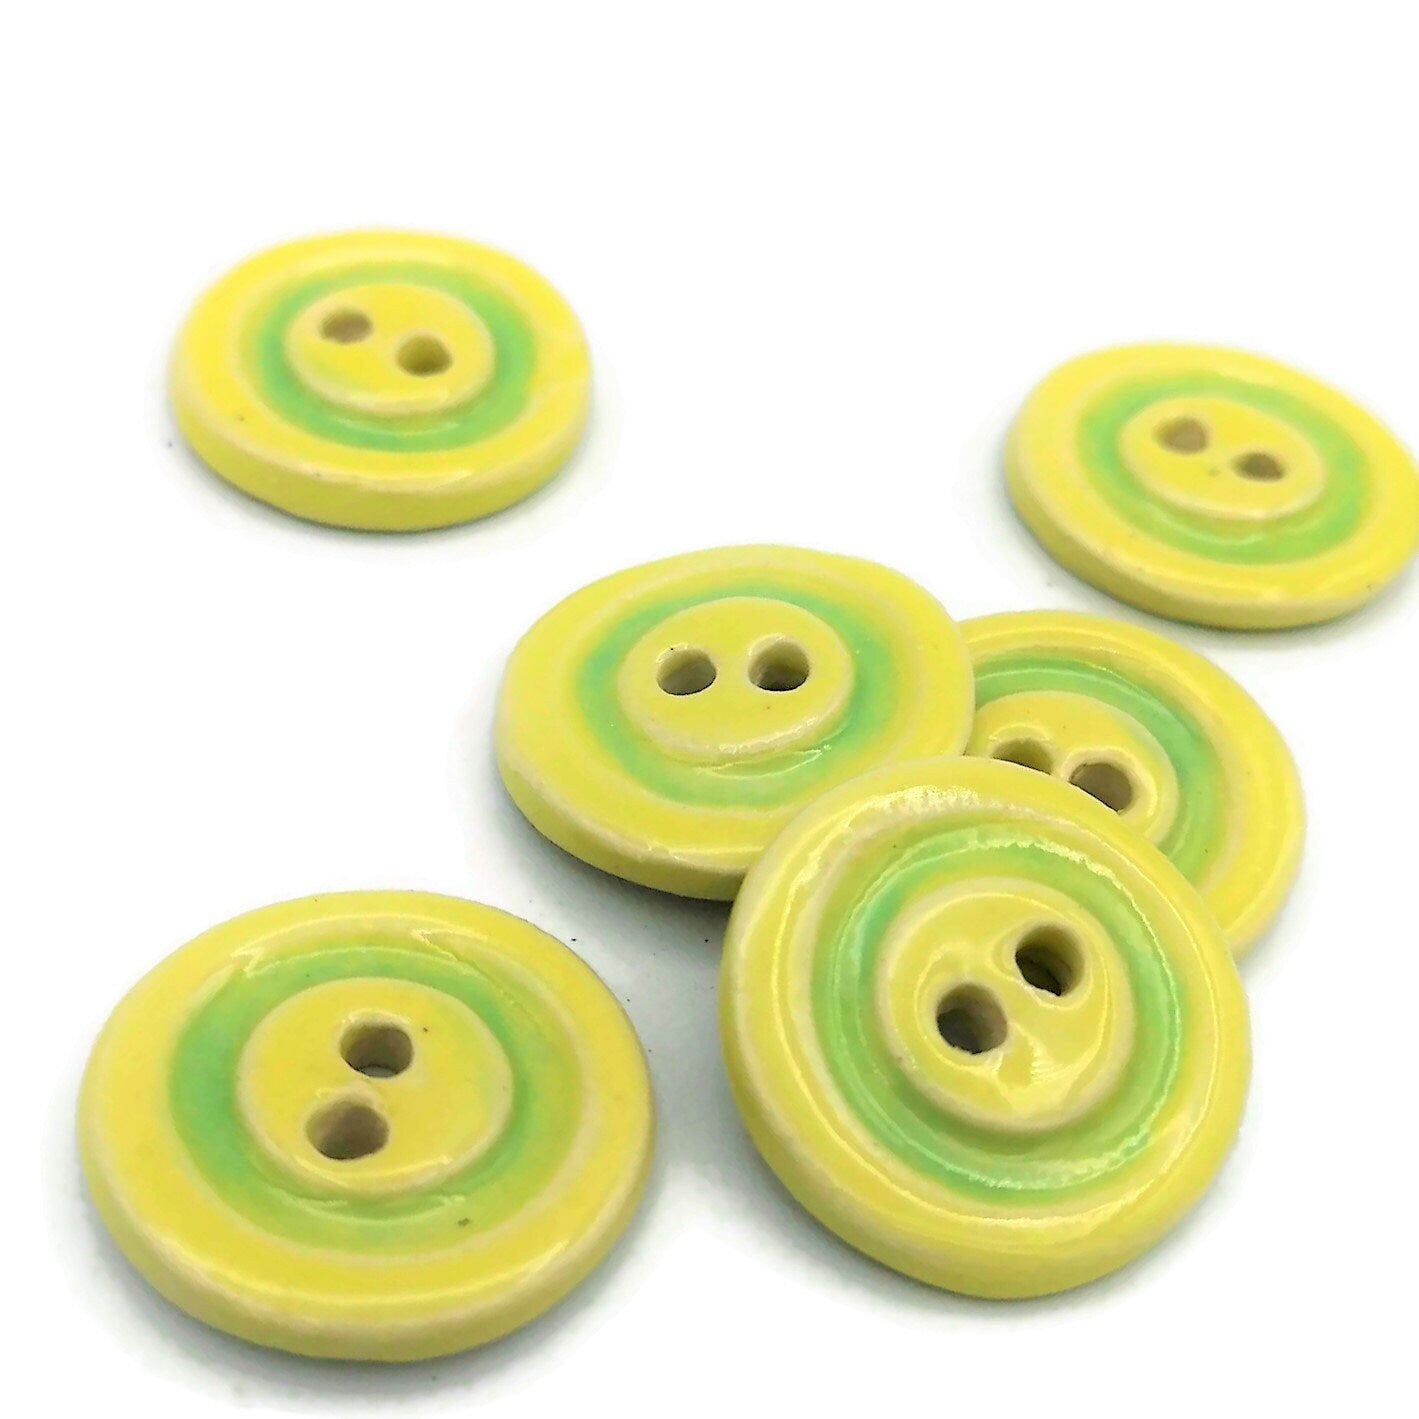 6Pc Green and Yelow Ceramic Buttons 1 inch Wide, Unique Sewing Supplies And Notions, Large Coat Buttons Decorative - Ceramica Ana Rafael